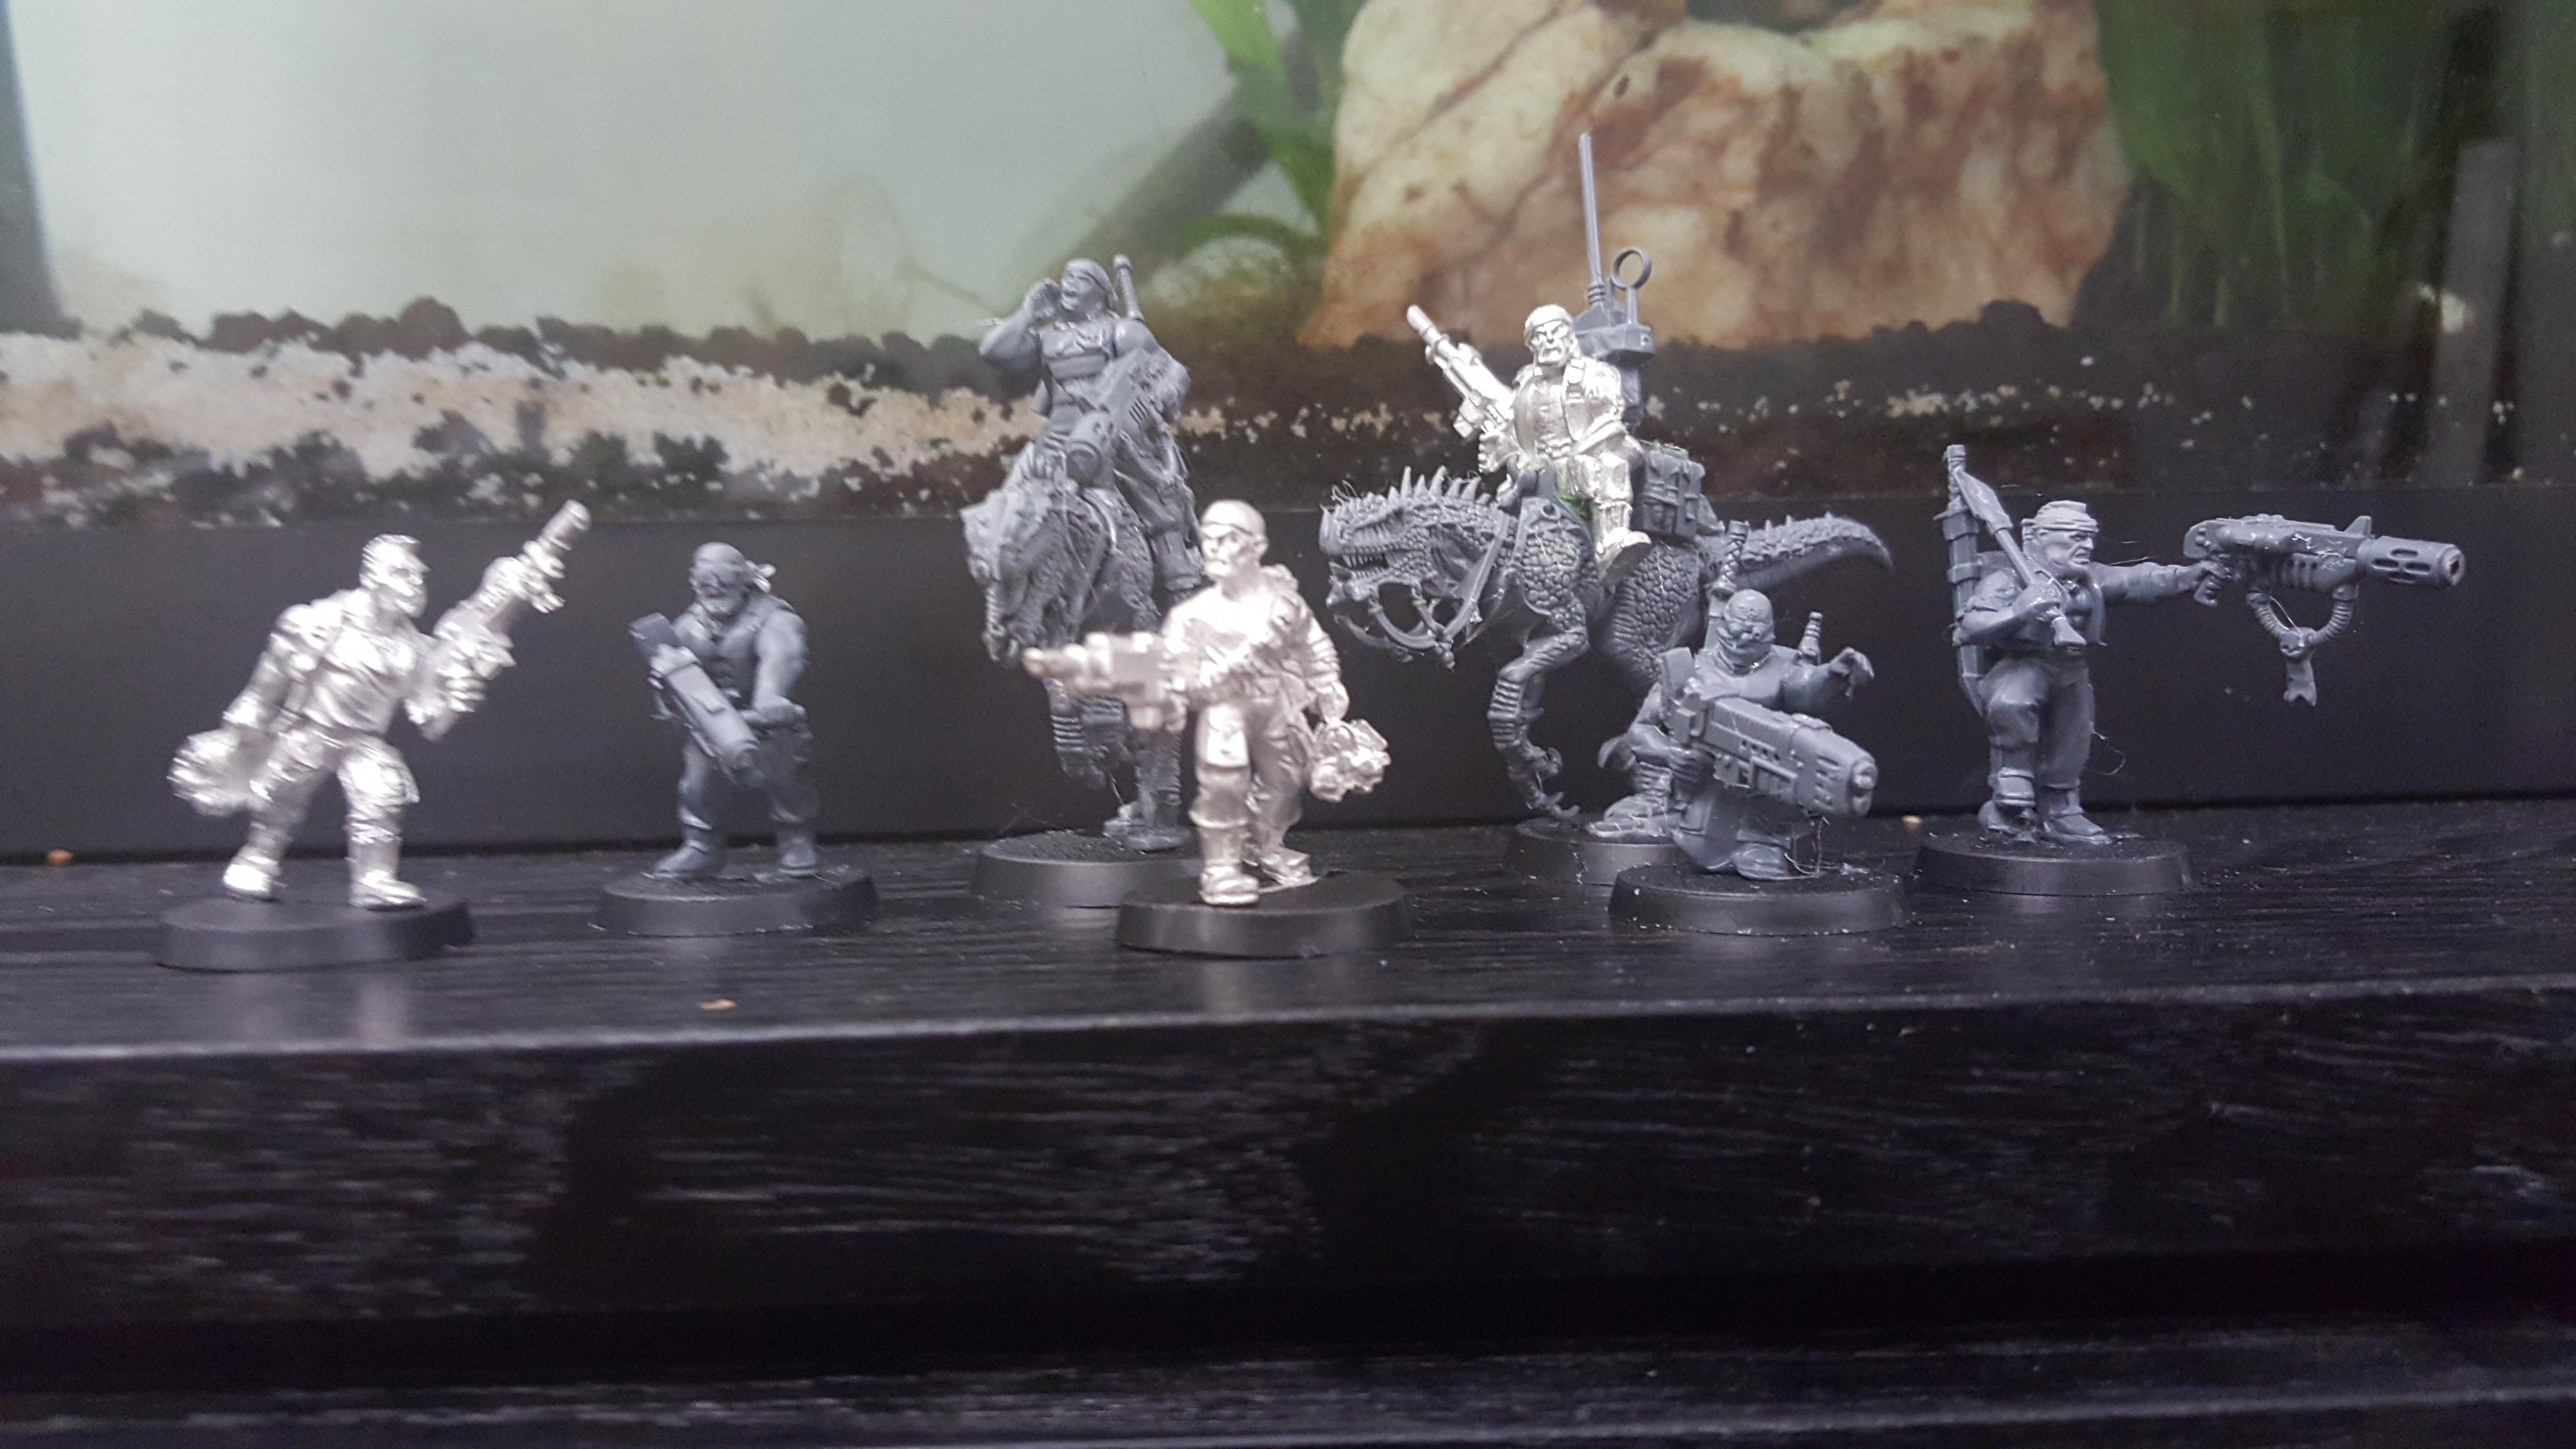 Catachan, Cold Ones, Dino Riders, Imperial Guard, Rough Riders